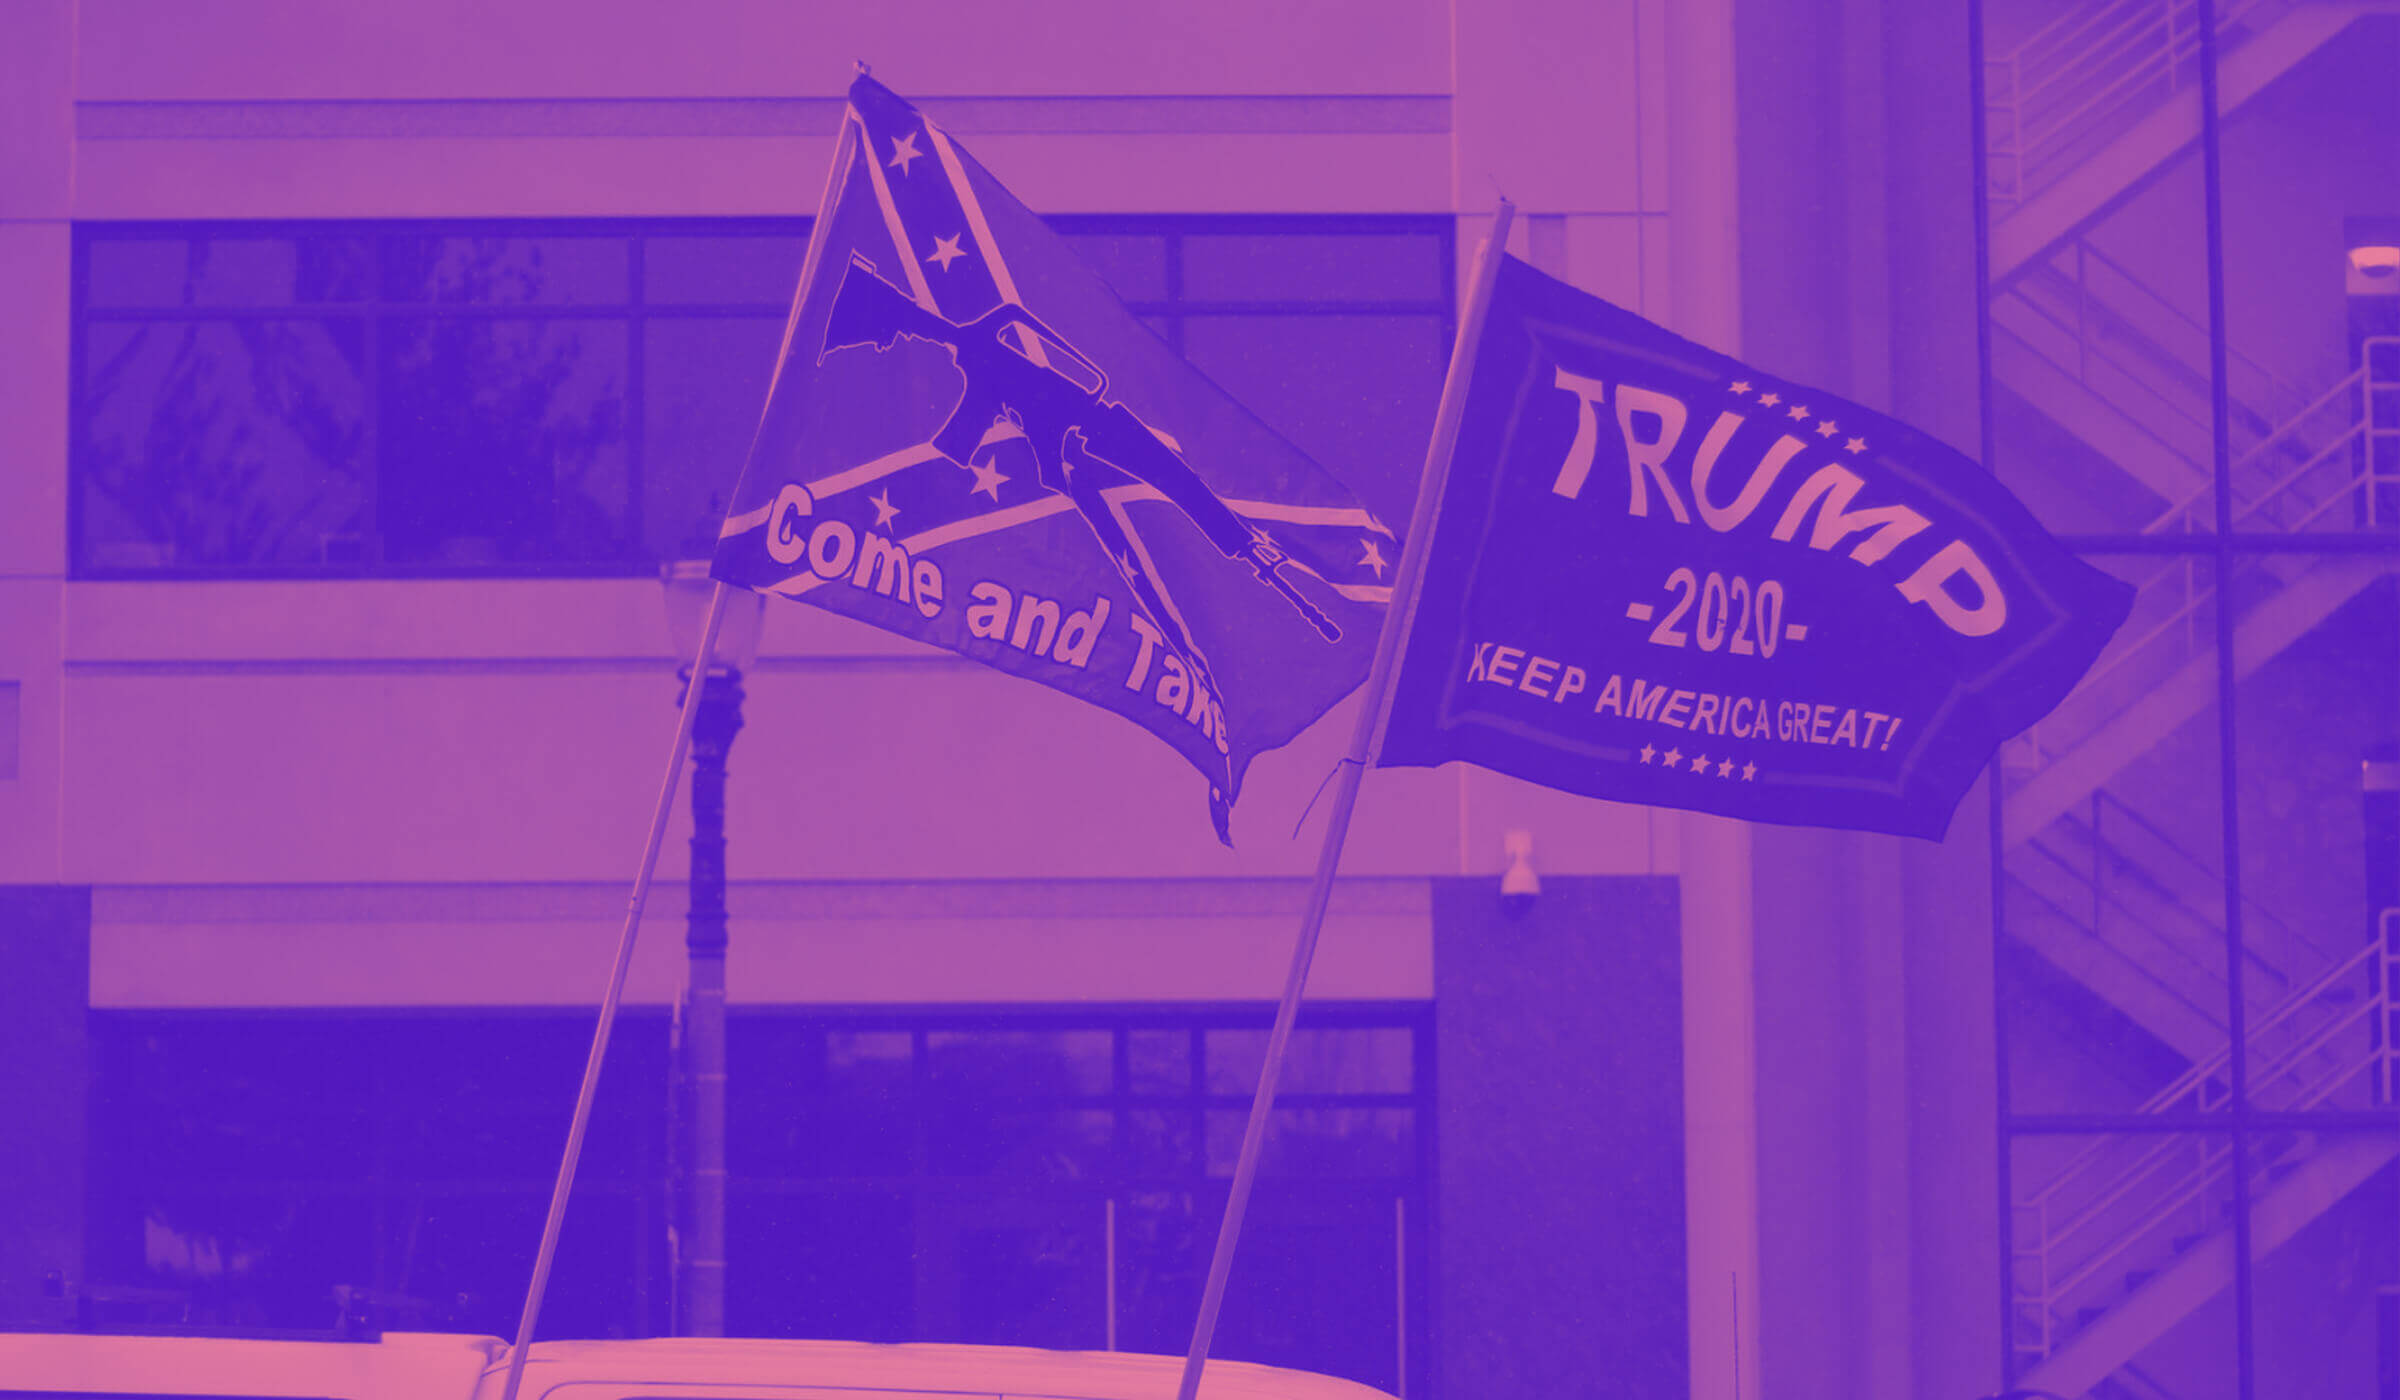 A confederate flag and Trump 2020 campaign flag wave at a right wing protest in Michigan amid the COVID-19 / novel coronavirus pandemic in April 2020